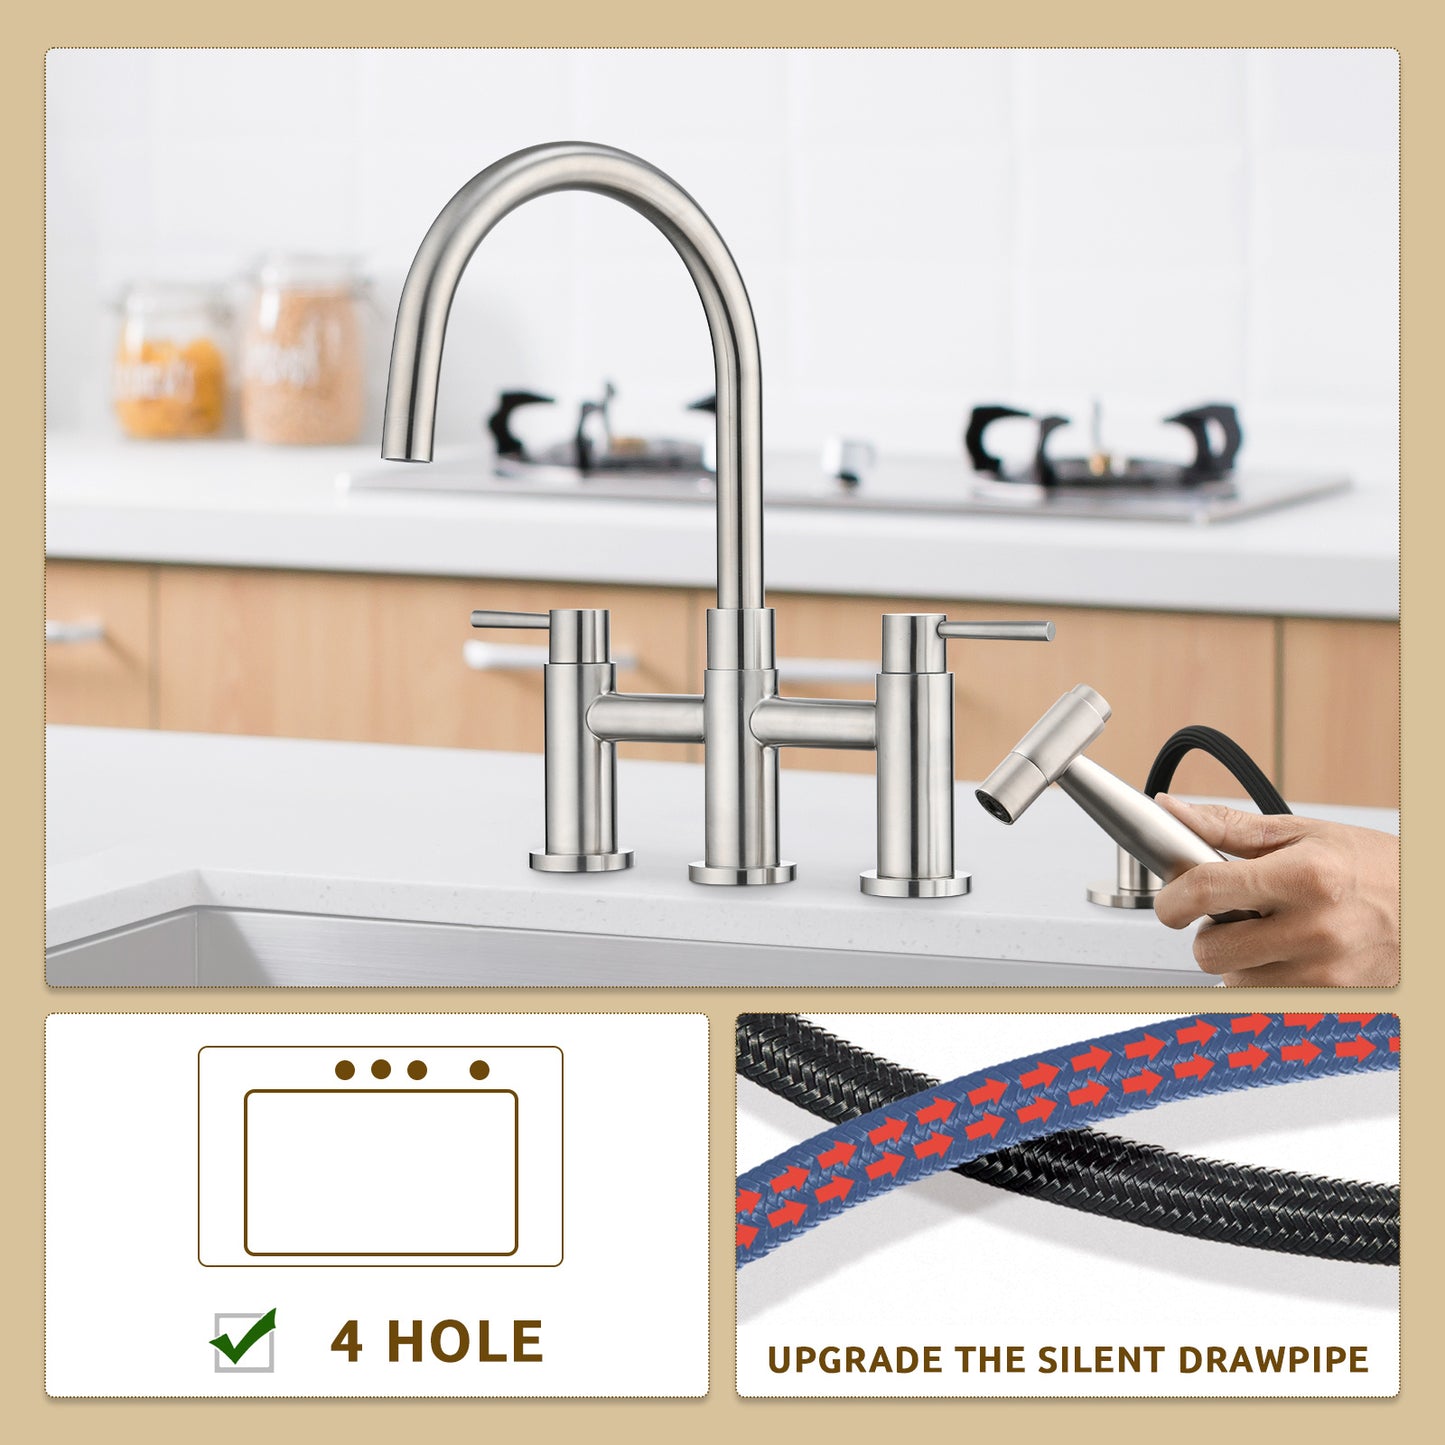 Double Handle Bridge Kitchen Faucet with Side Spray